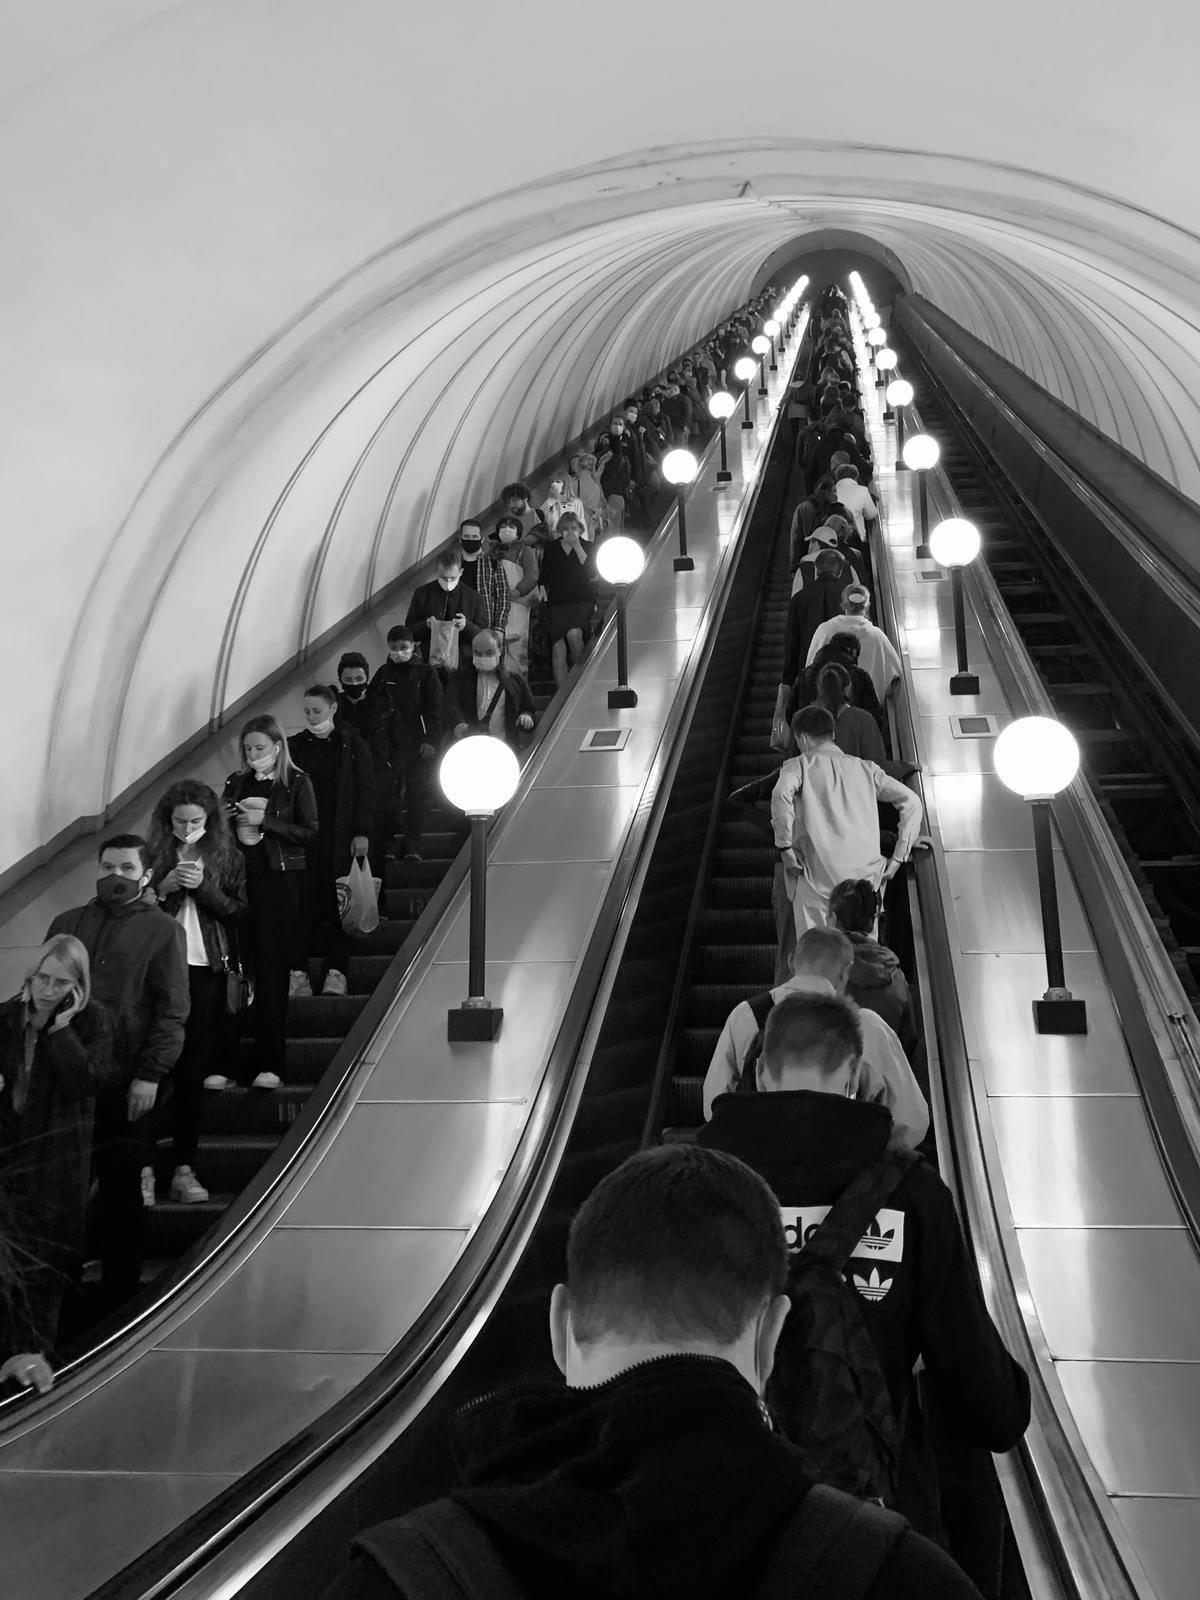 <p>As the rules of the road, it is important for people walking through public transportation stations to remember to move to the right-hand side so those in a hurry can pass by on the left.</p> <p>This not only goes for walking but also on escalators and even in the vehicles themselves.</p>